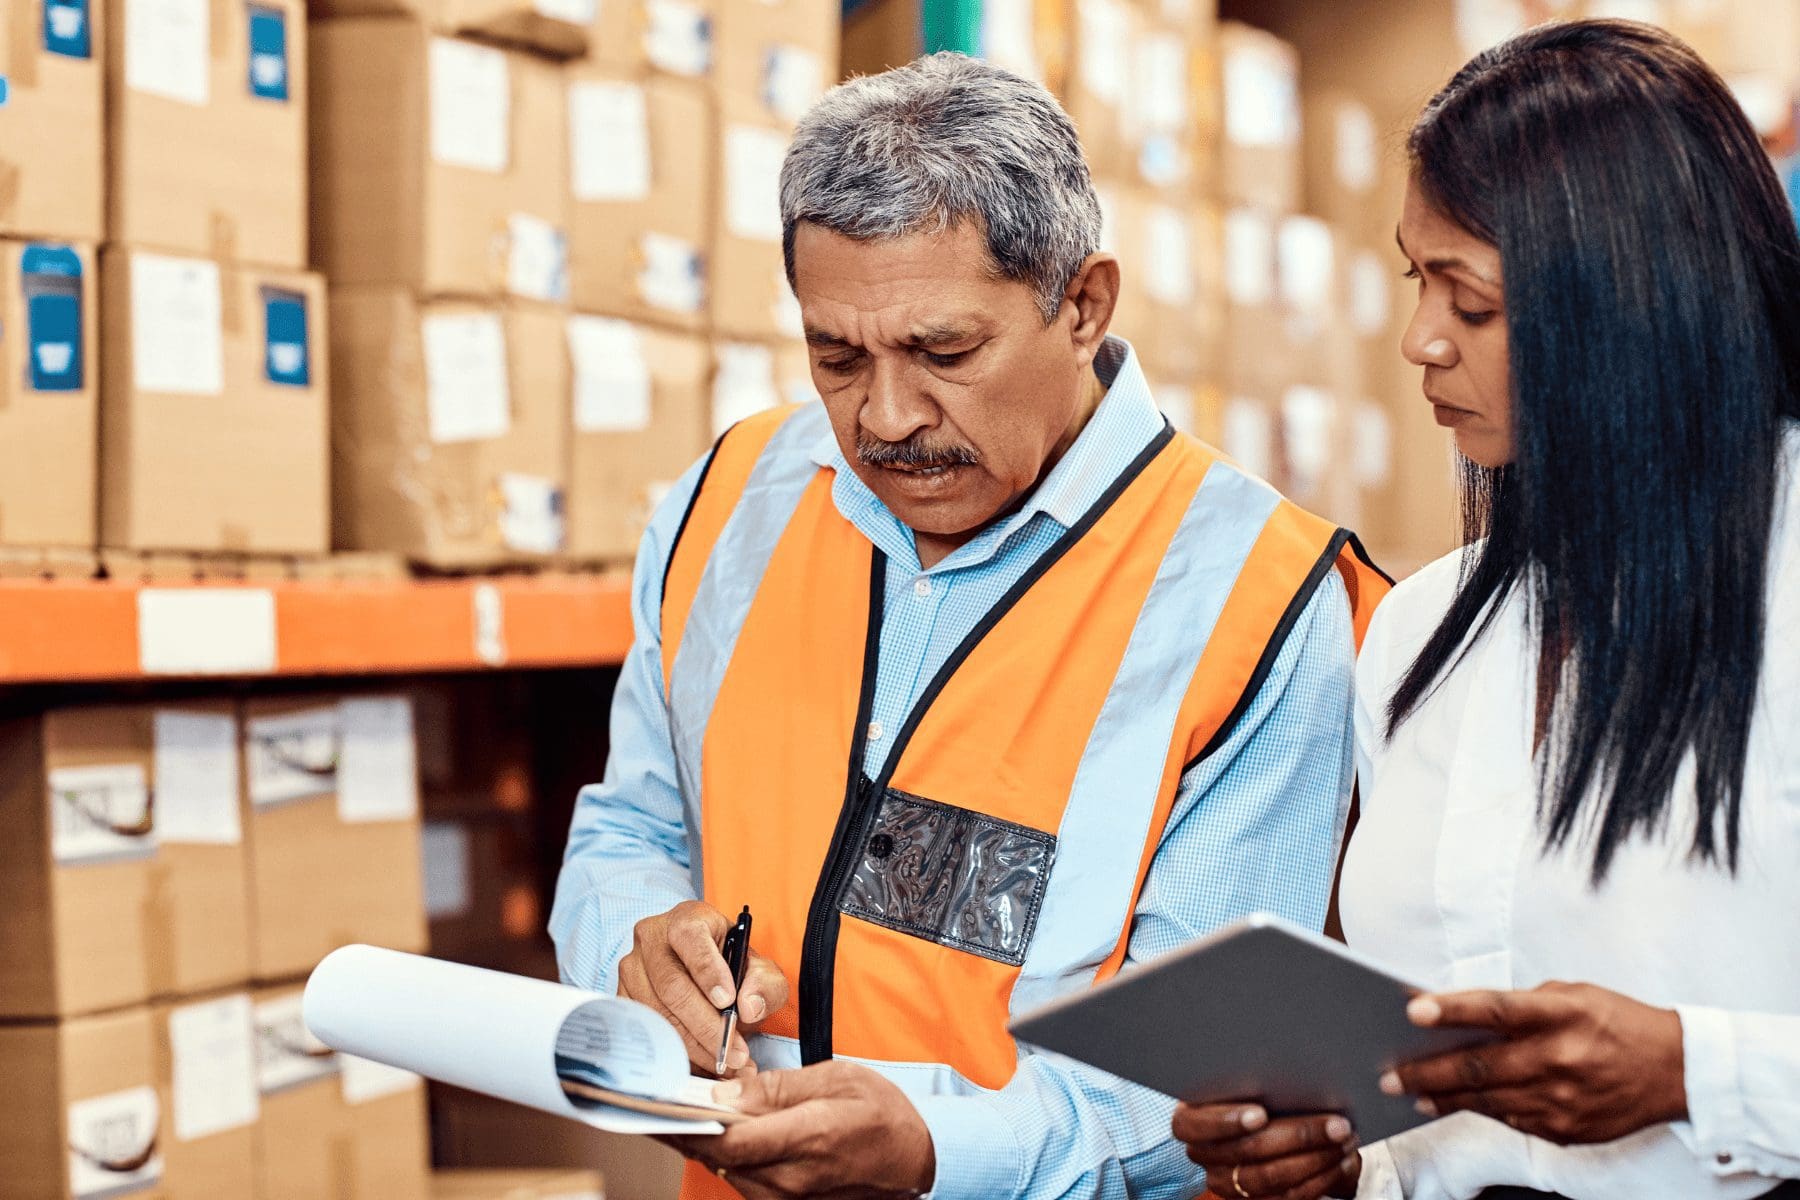 distribution center workers managing supply chain risks